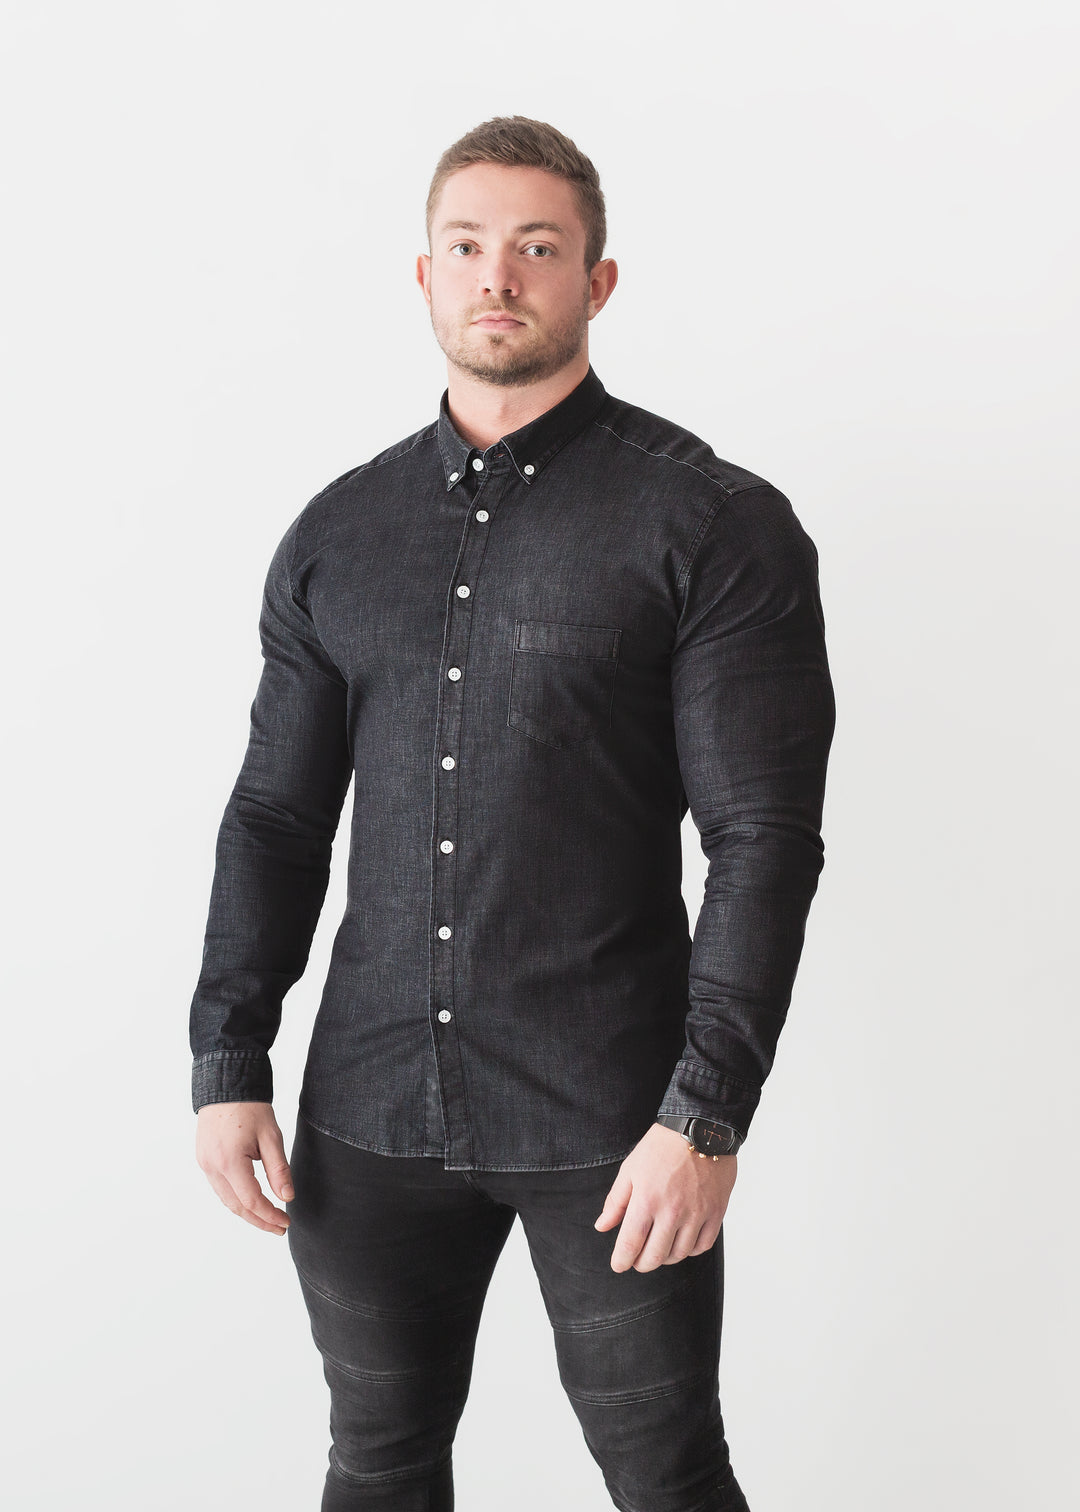 Black Denim Tapered Fit Shirt For Men. A Proportionally Fitted and Denim Muscle Fit Shirt. Best Shirts For a Muscular Build